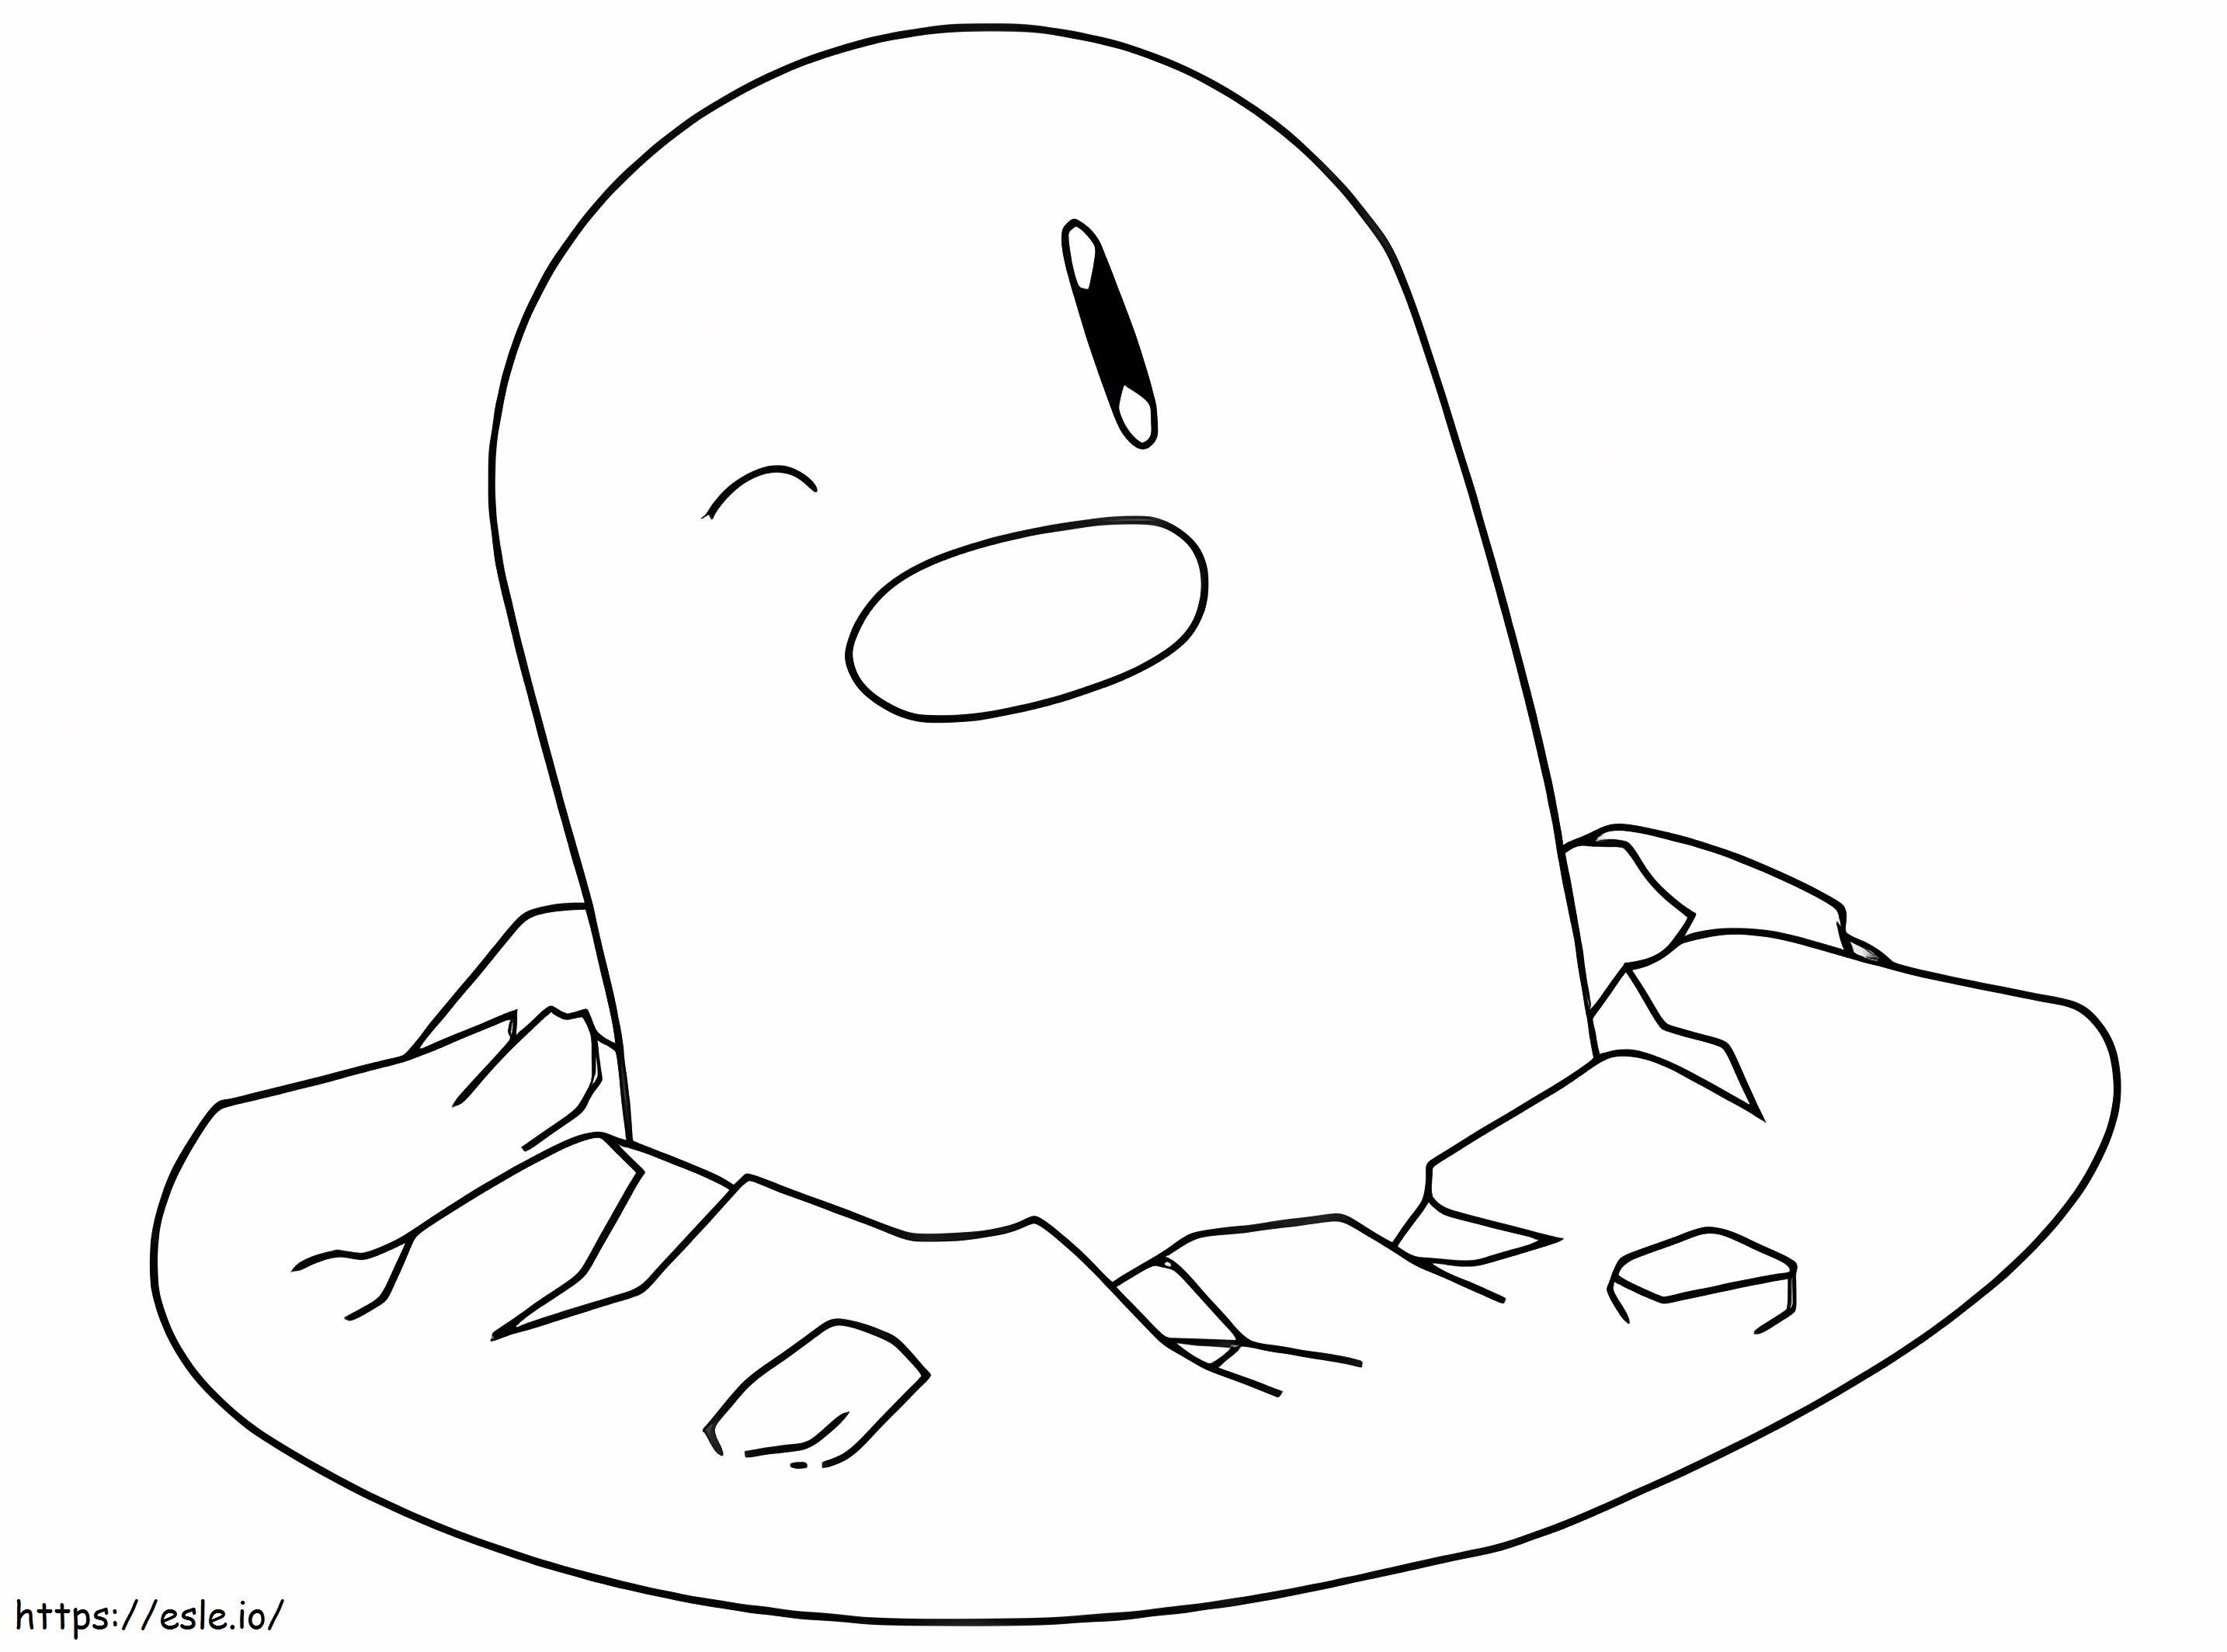 Diglett 5 coloring page